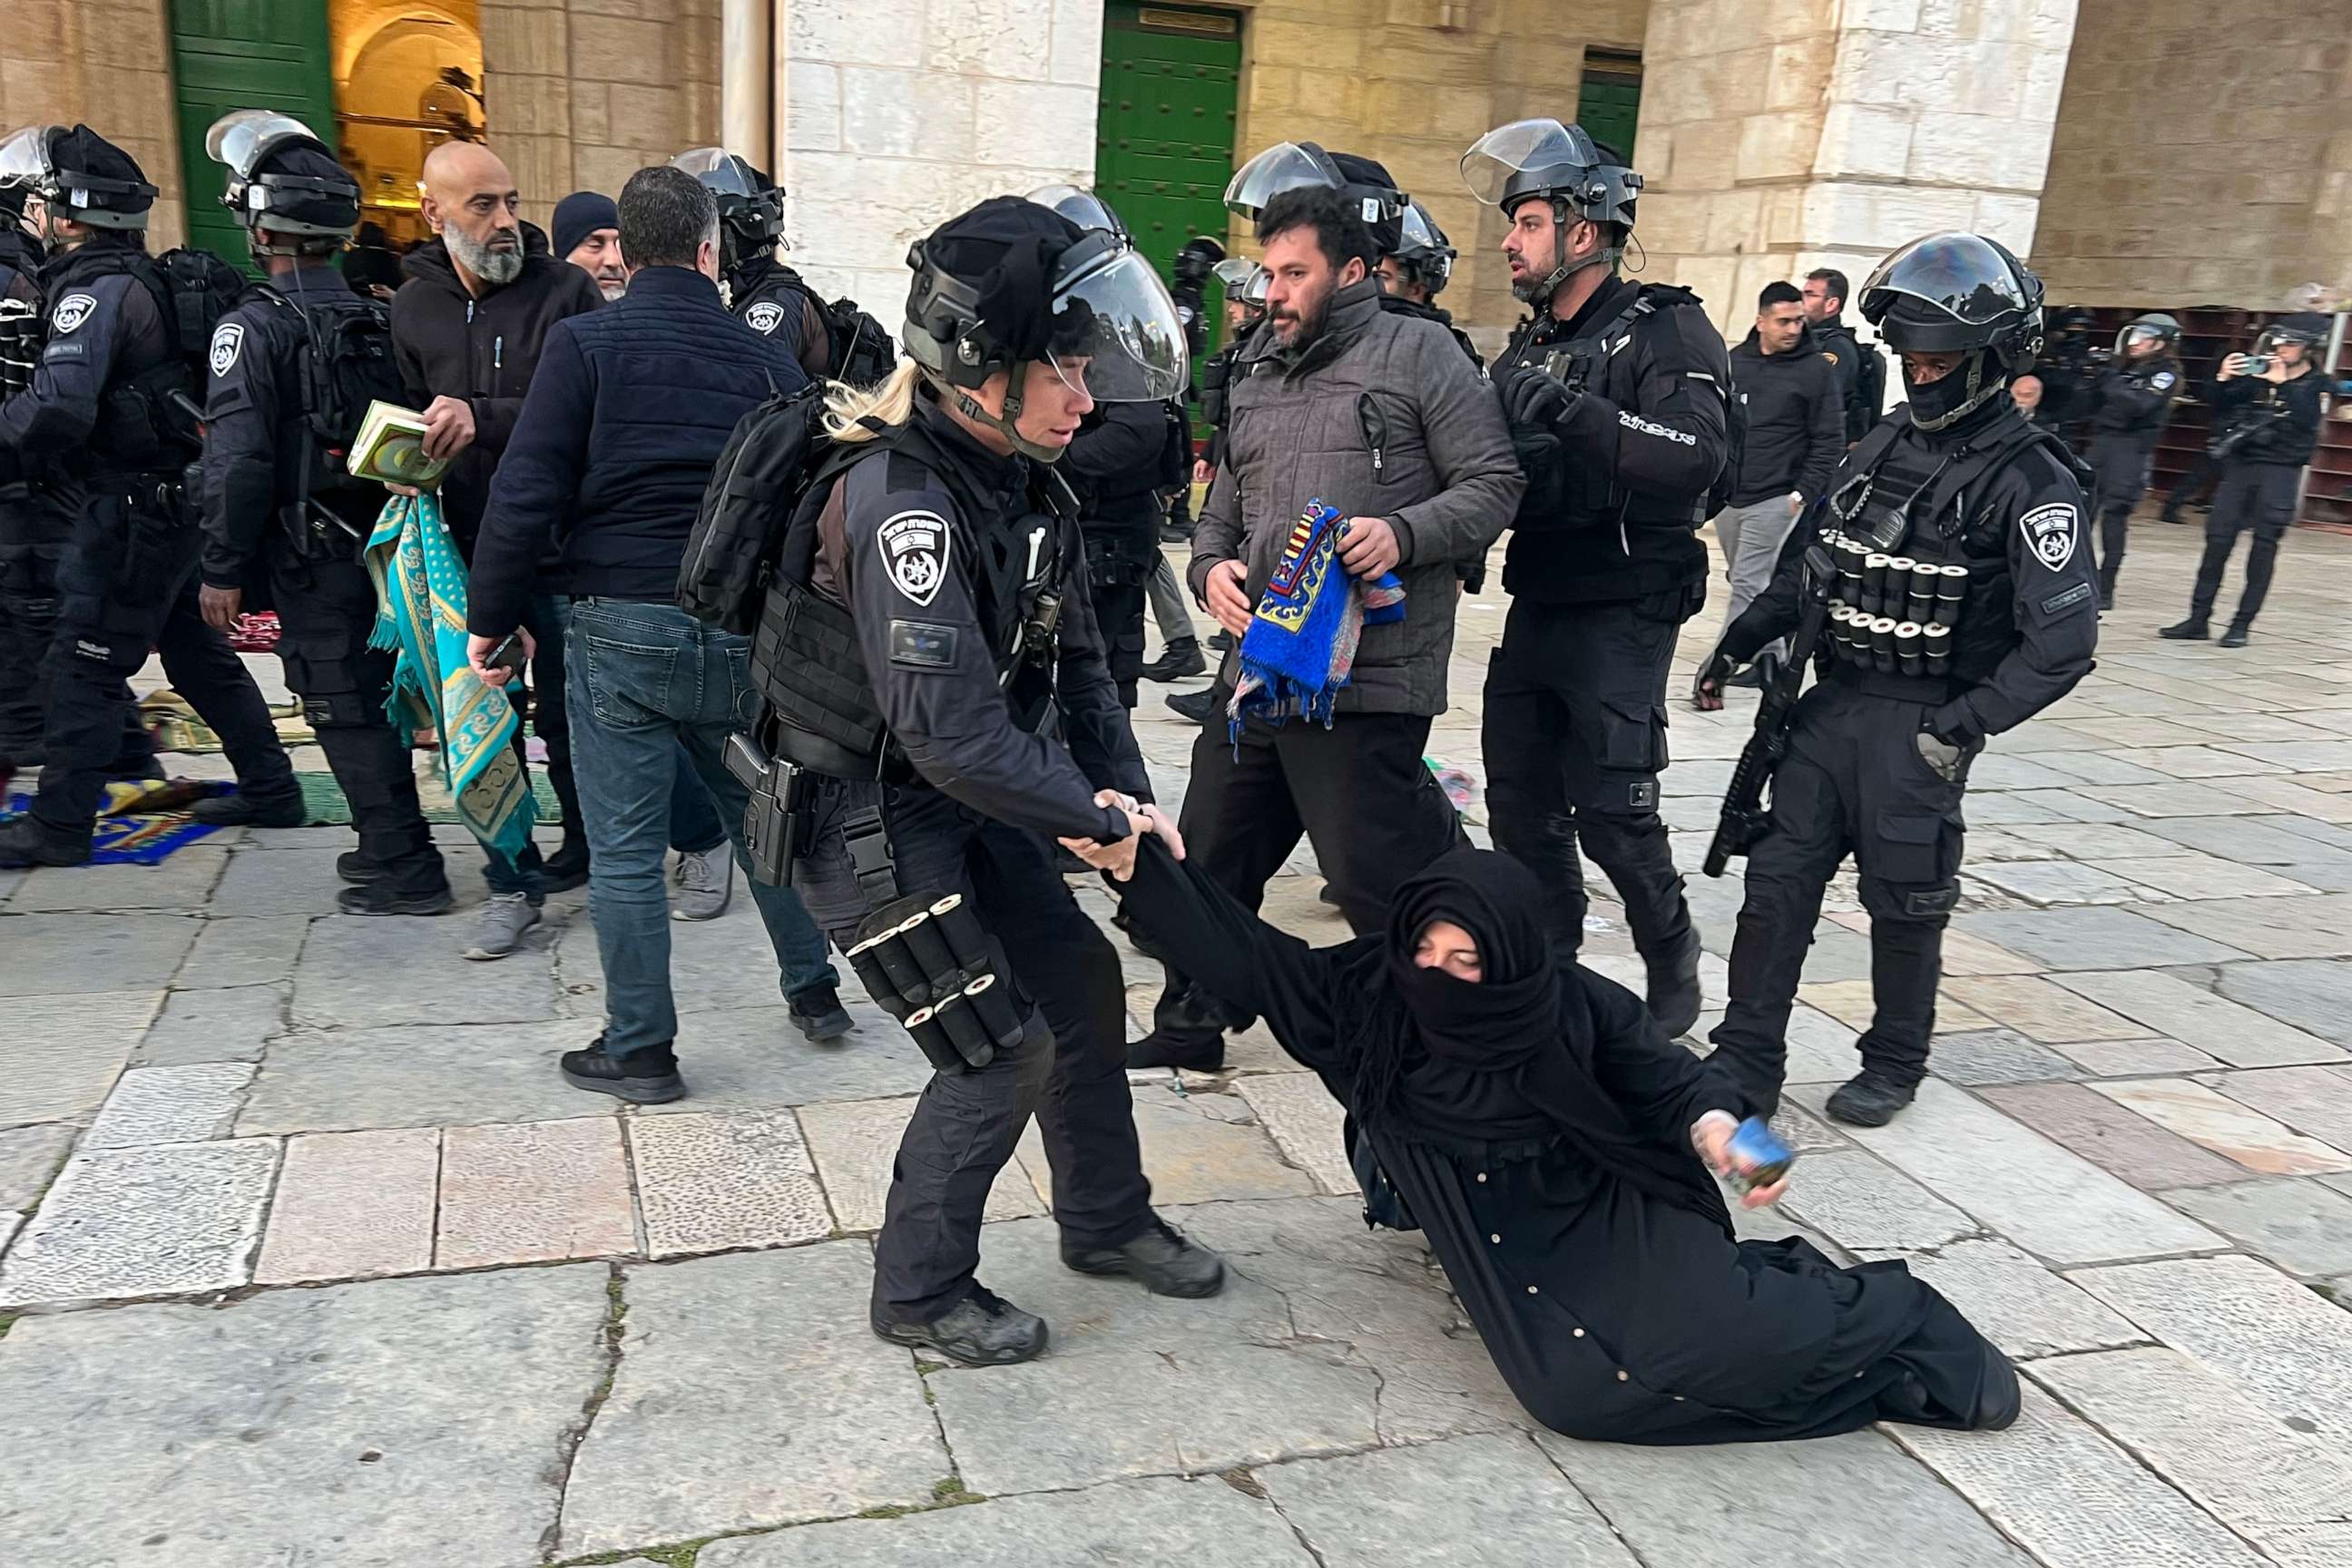 PHOTO: Israeli security forces remove Palestinian Muslim worshippers sitting on the grounds of the Al-Aqsa mosque compound in Jerusalem, early on April 5, 2023 during Islam's holy month of Ramadan.